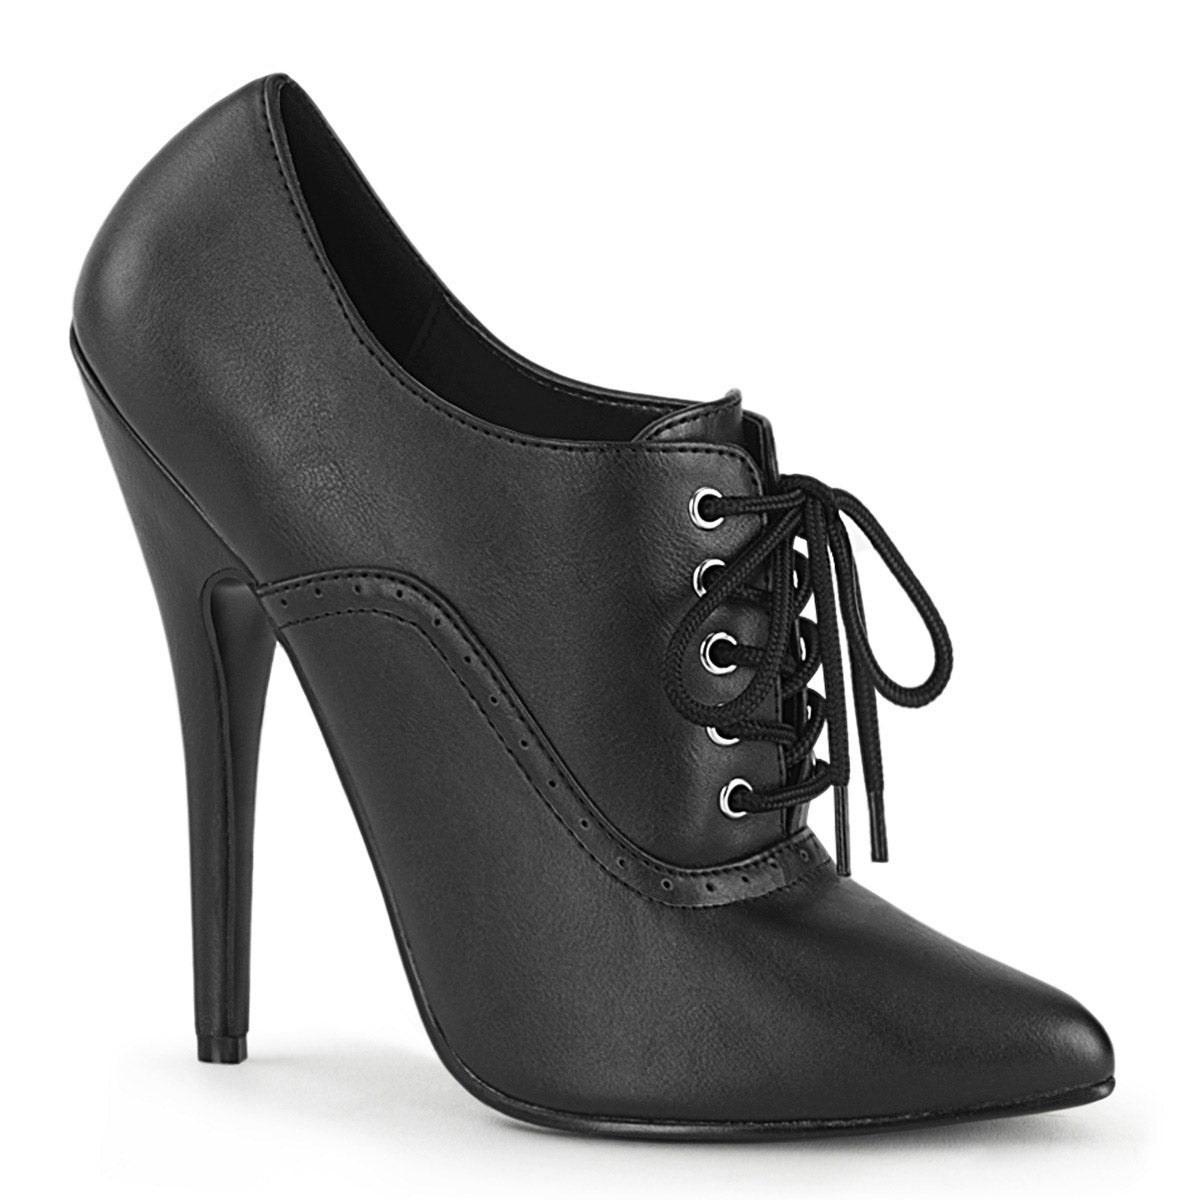 6" Oxford Lace-Up Pump Pleaser Devious DOMINA/460